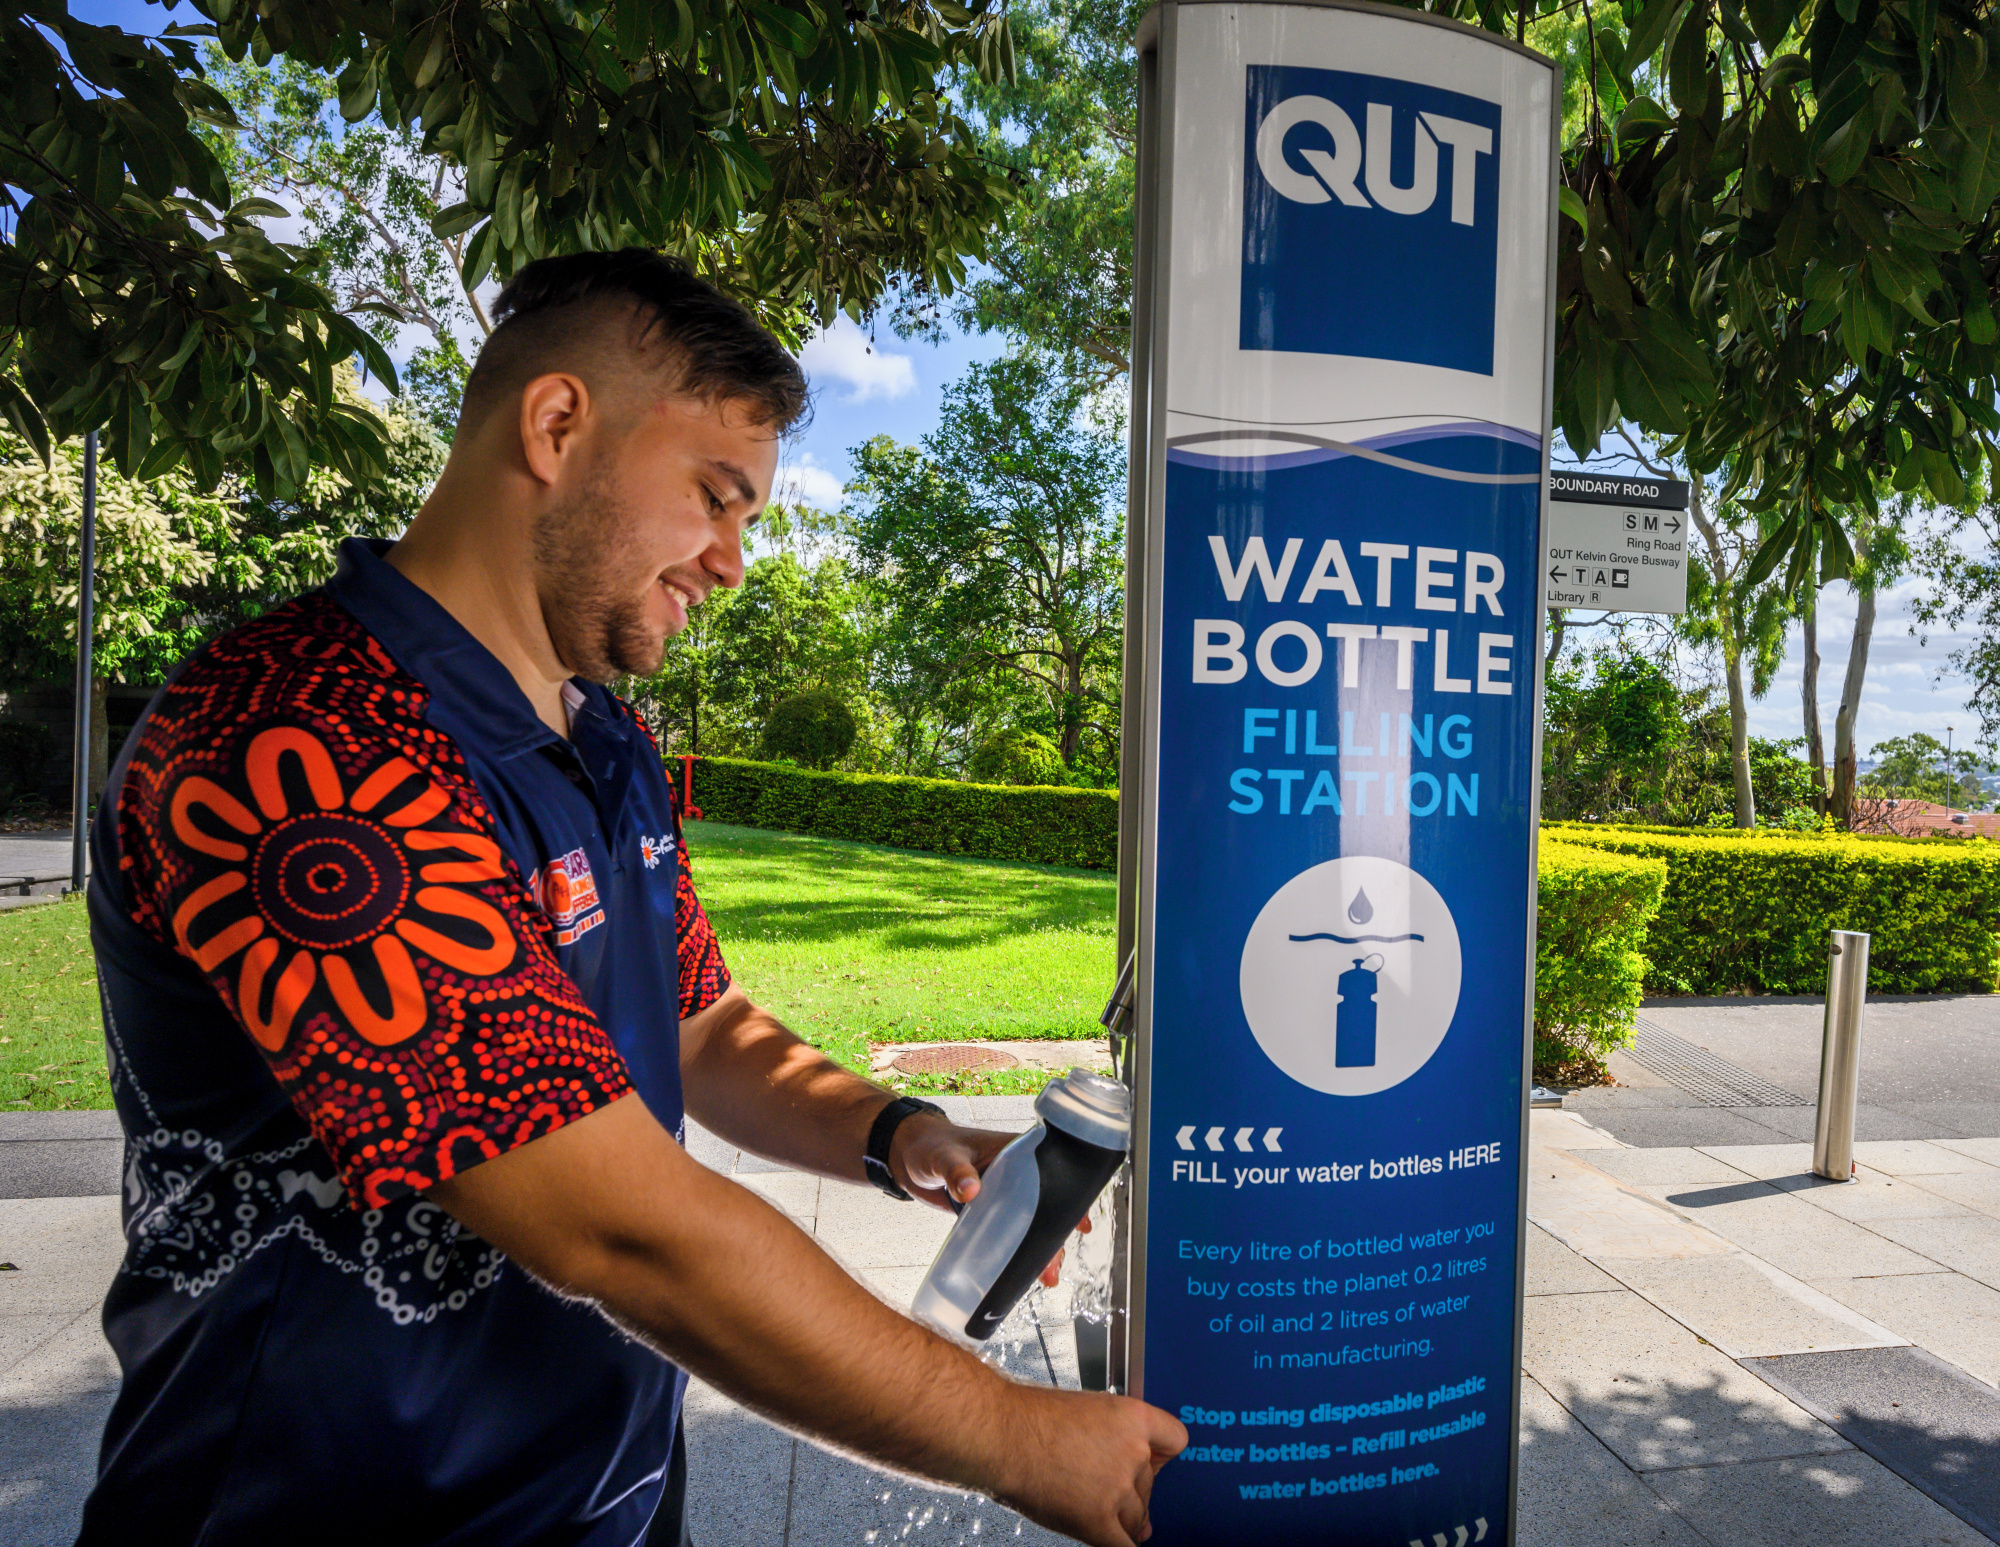 a man fills a water bottle from a water bottle filling station